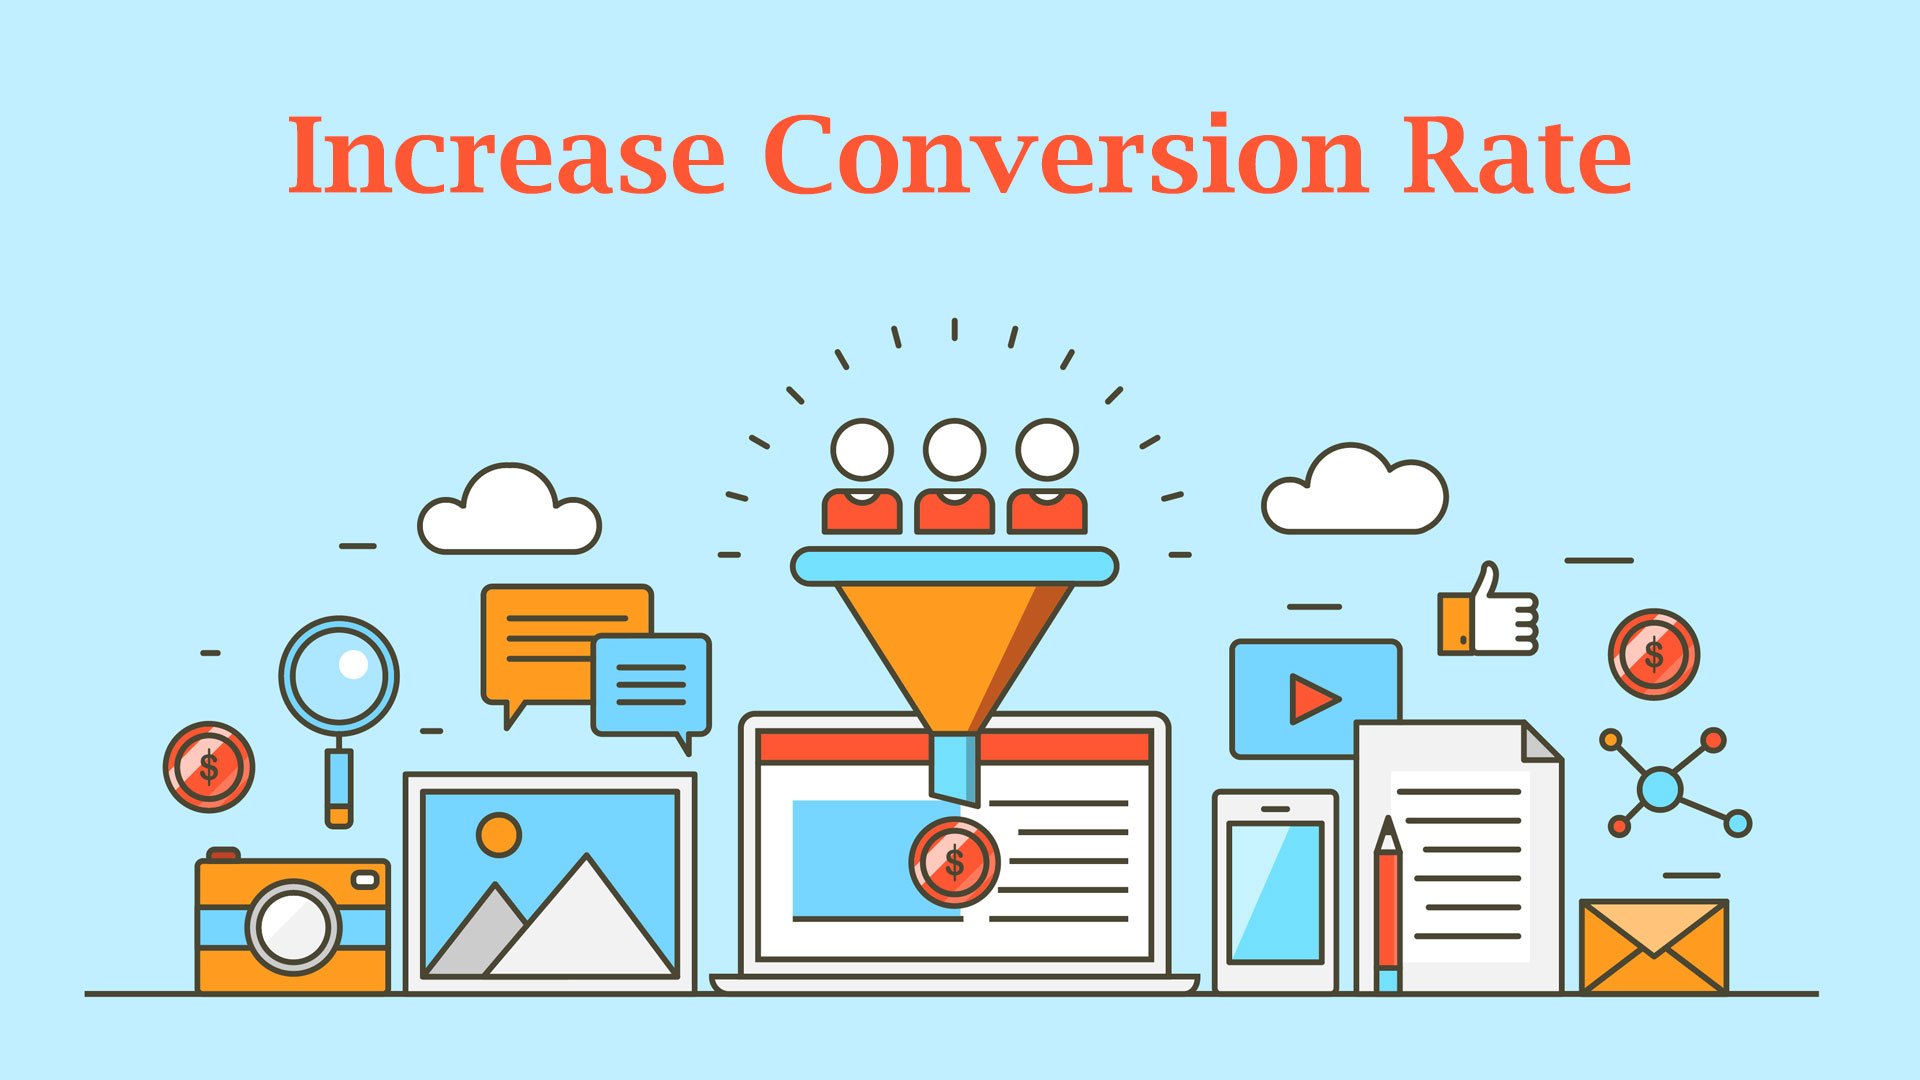 Increase the Conversion Rate